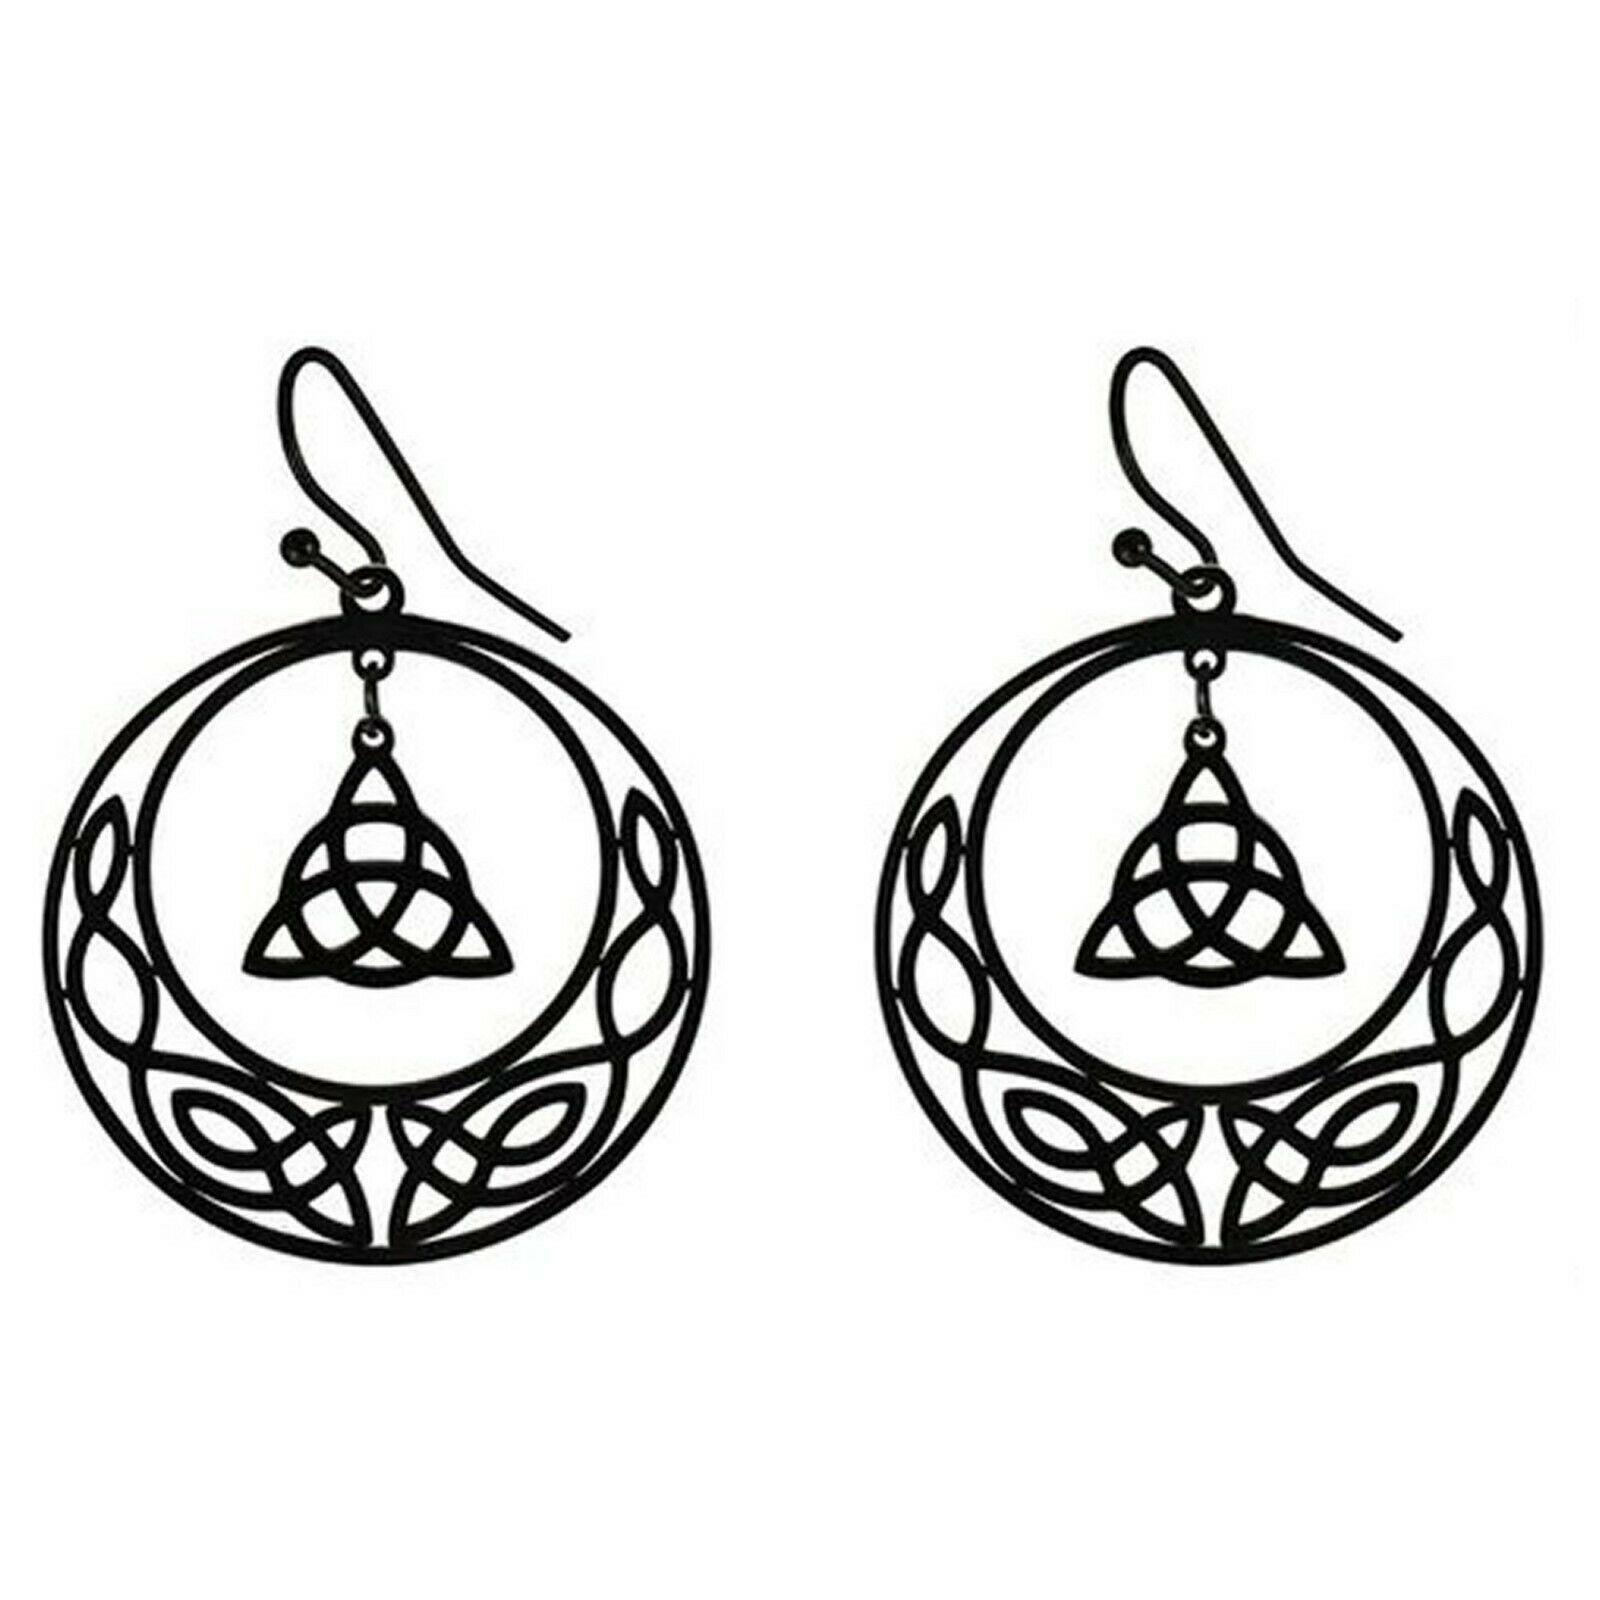 Primary image for Celtic Circle Trinity Knot Earrings Hypoallergenic Black Stainless Steel